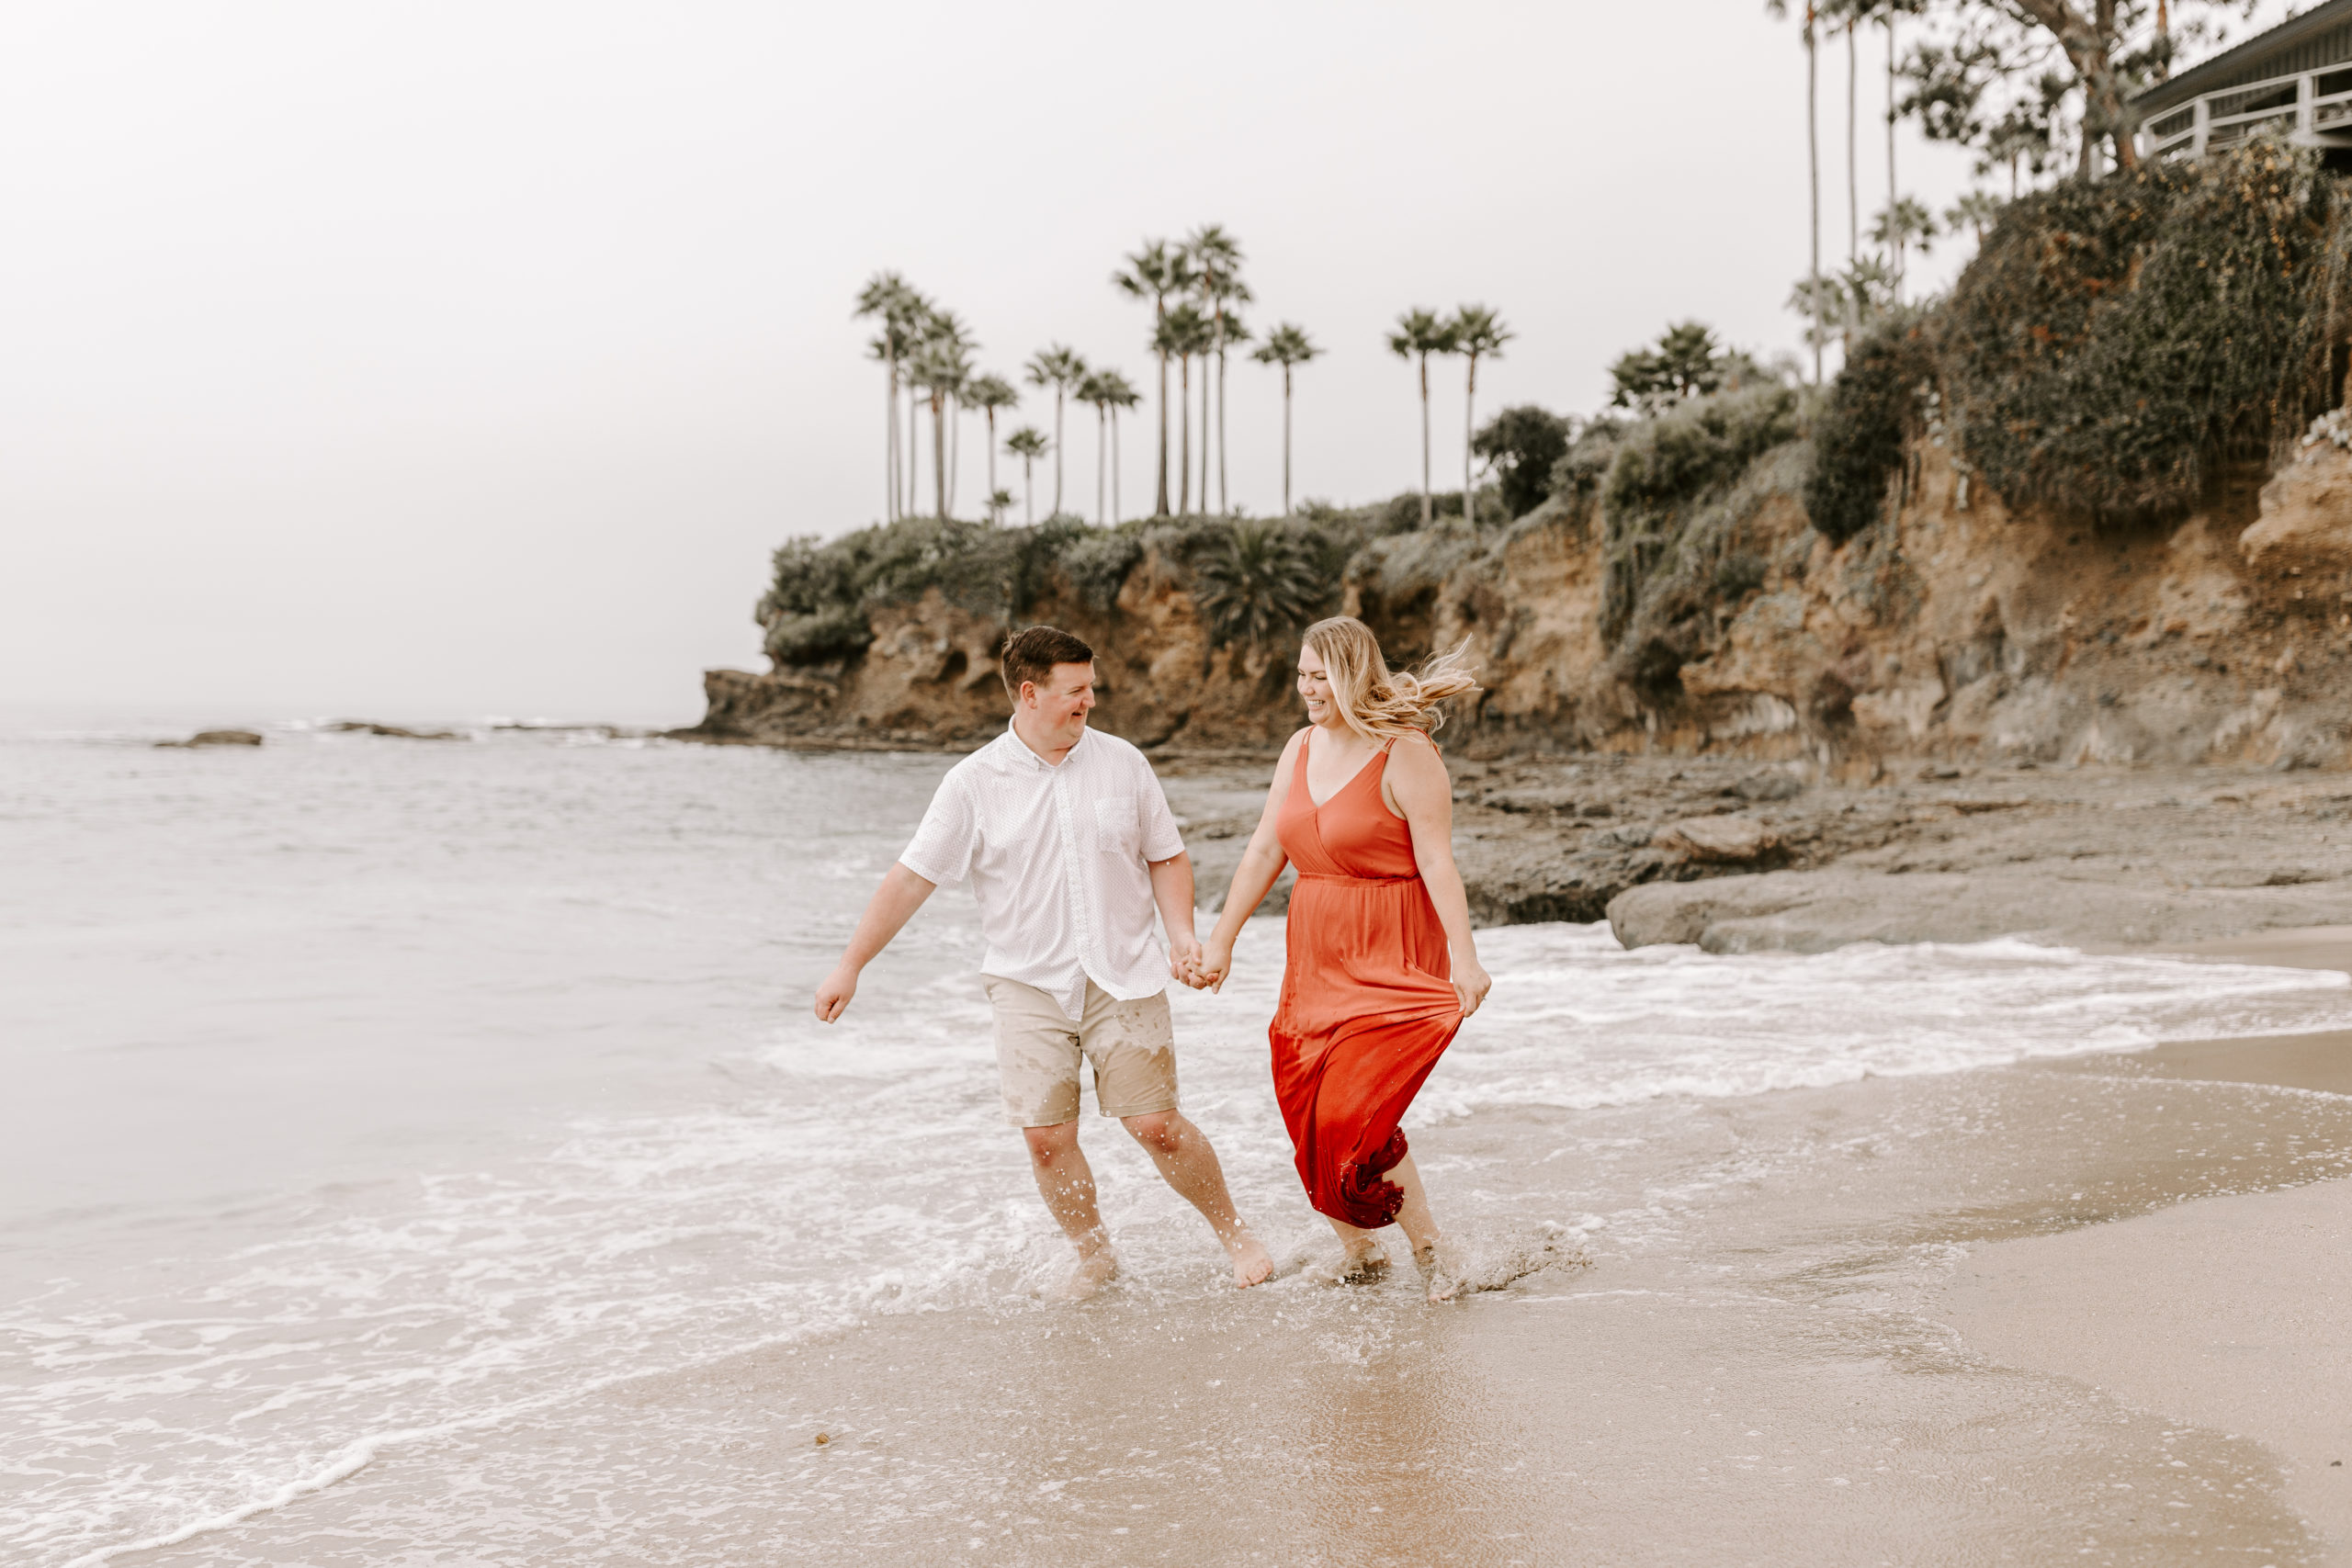 Couple holding hands and running on a beach in California